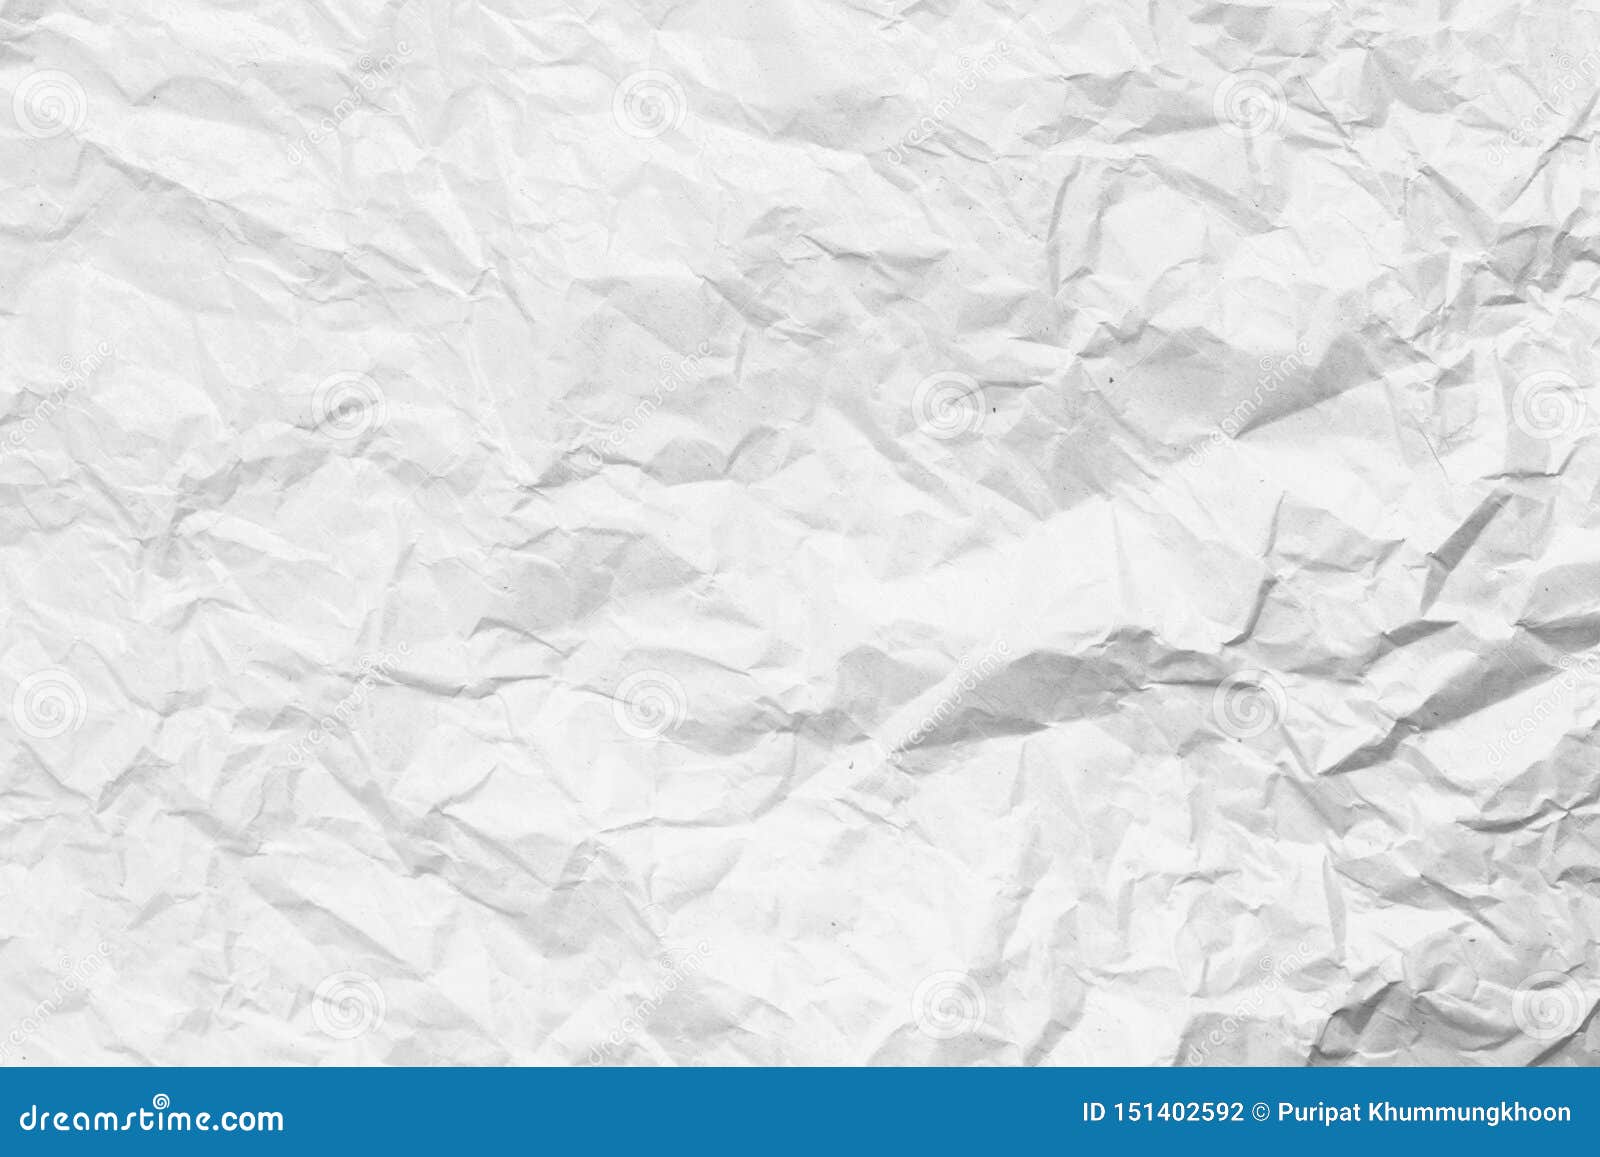 Paper Texture Background Crumpled Paper Texture For Background And Design Stock Photo Image Of Medieval Abstract